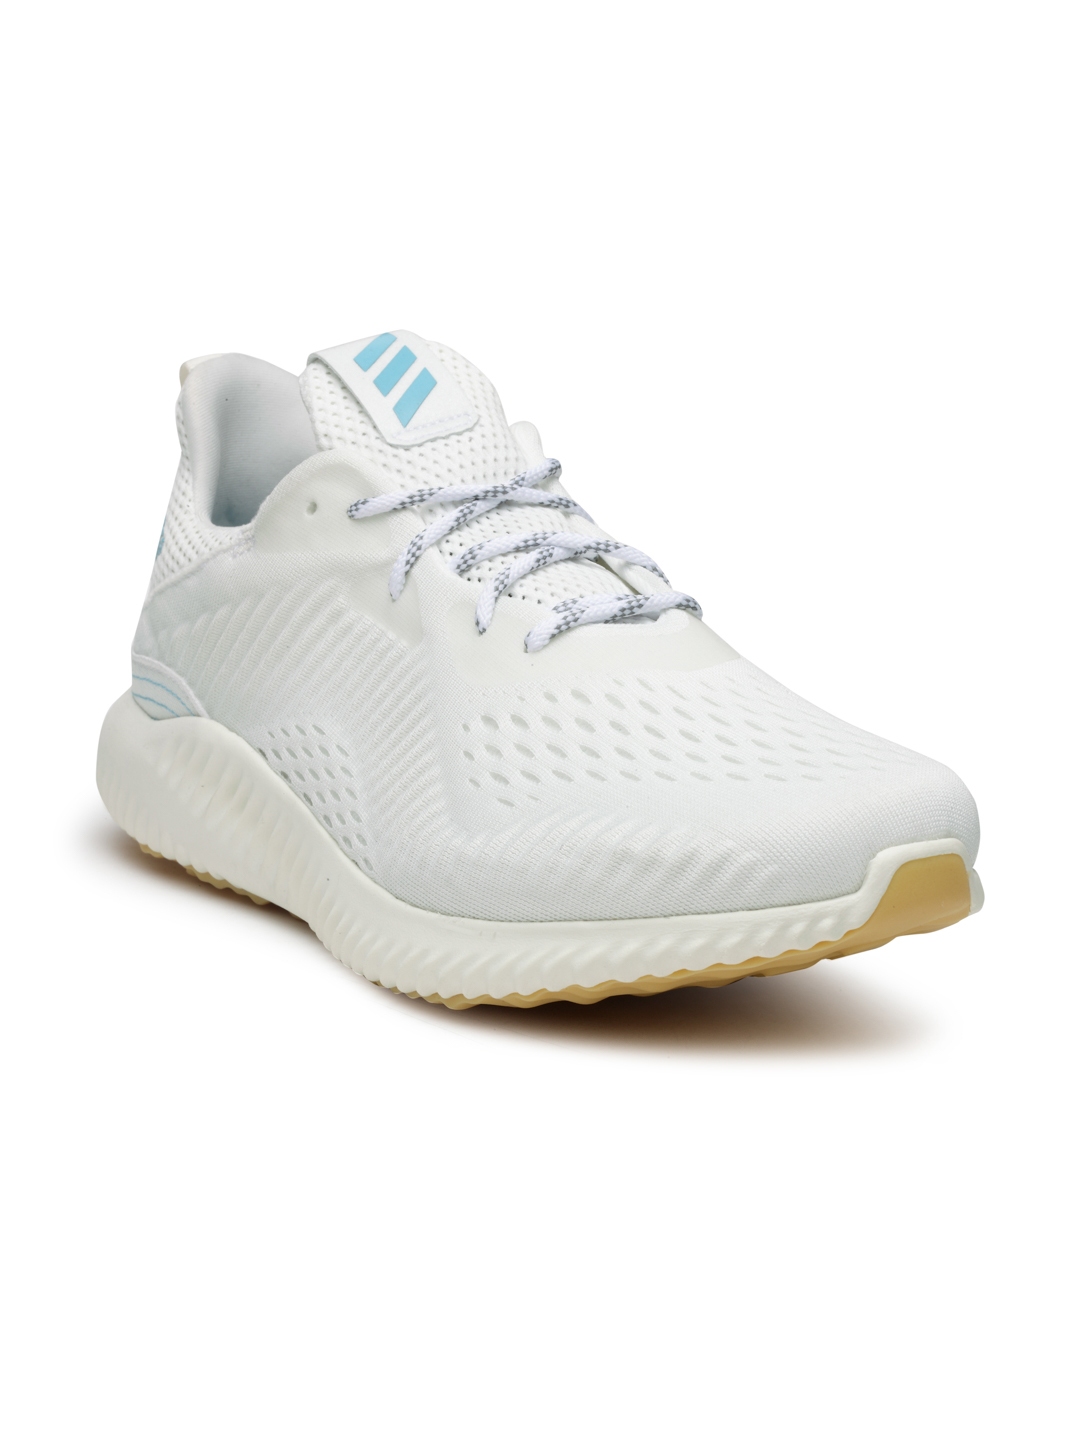 women's adidas alphabounce 1 parley running shoes